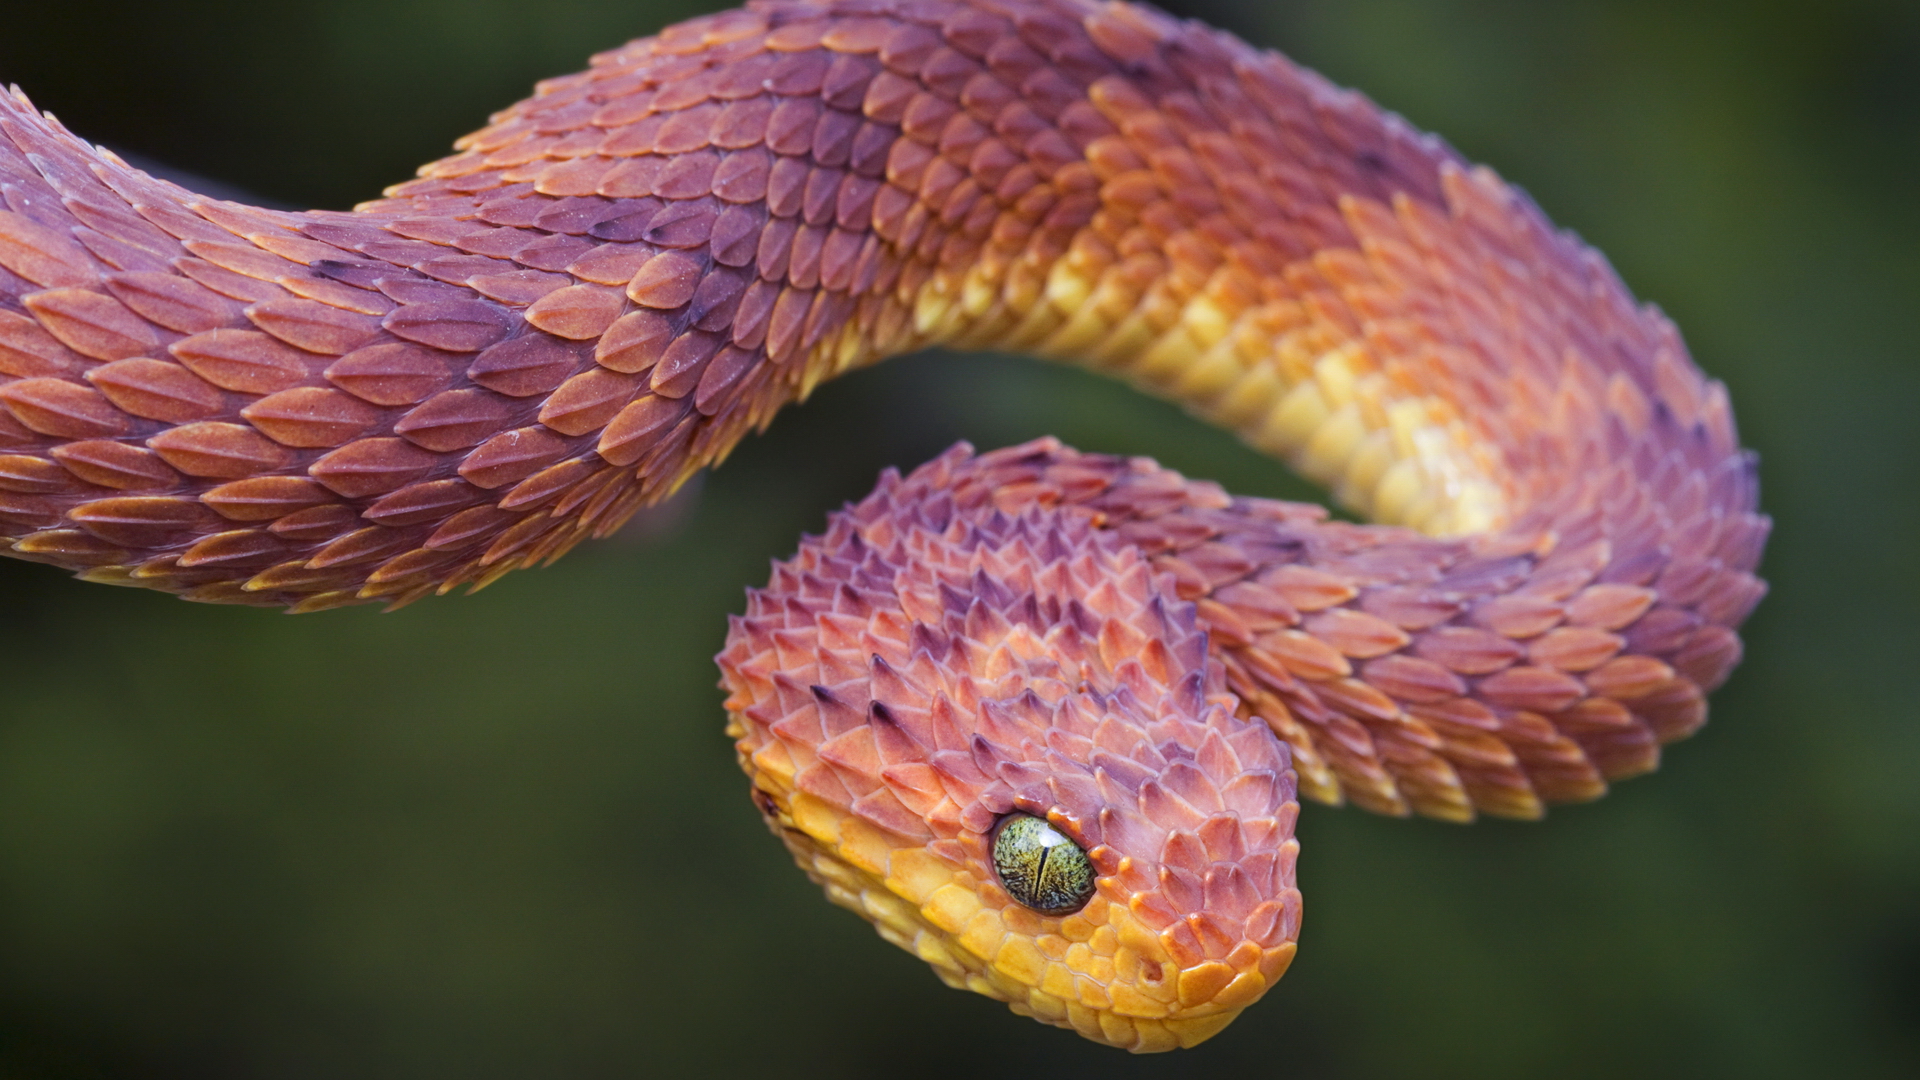 Pink Snake Hd Wallpapers